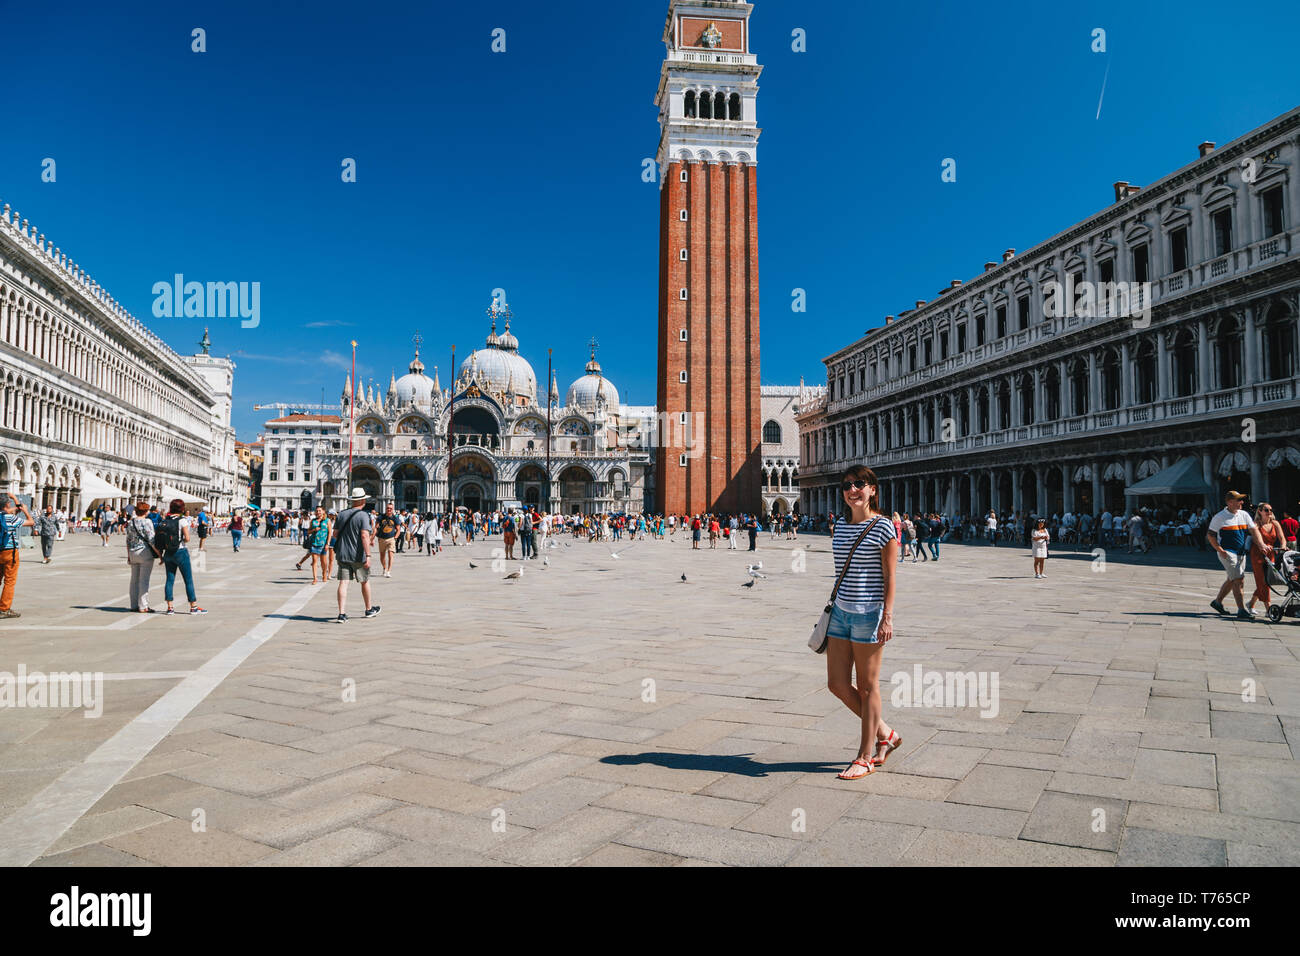 Venice, Italy - September, 9 2018: Young smiling woman tourist walking in the middle of at St. Mark's Square, Piazza San Marco with St Mark's Campanil Stock Photo